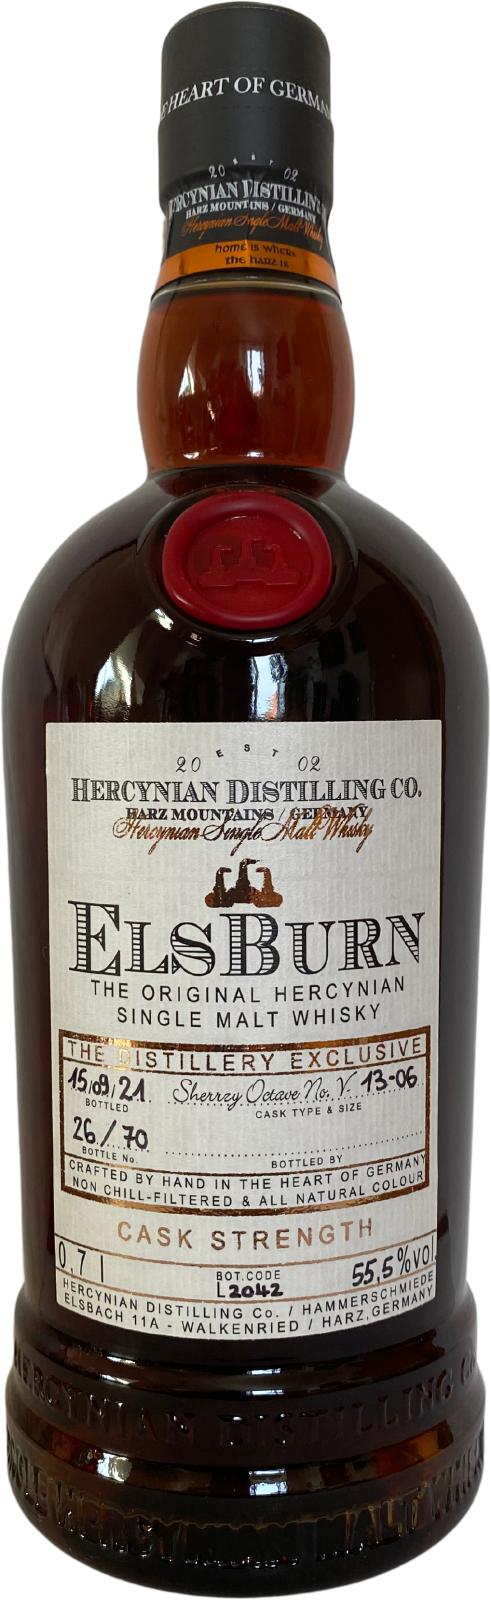 ElsBurn The Distillery Exclusive Sherry Octave 13-06 55% 700ml